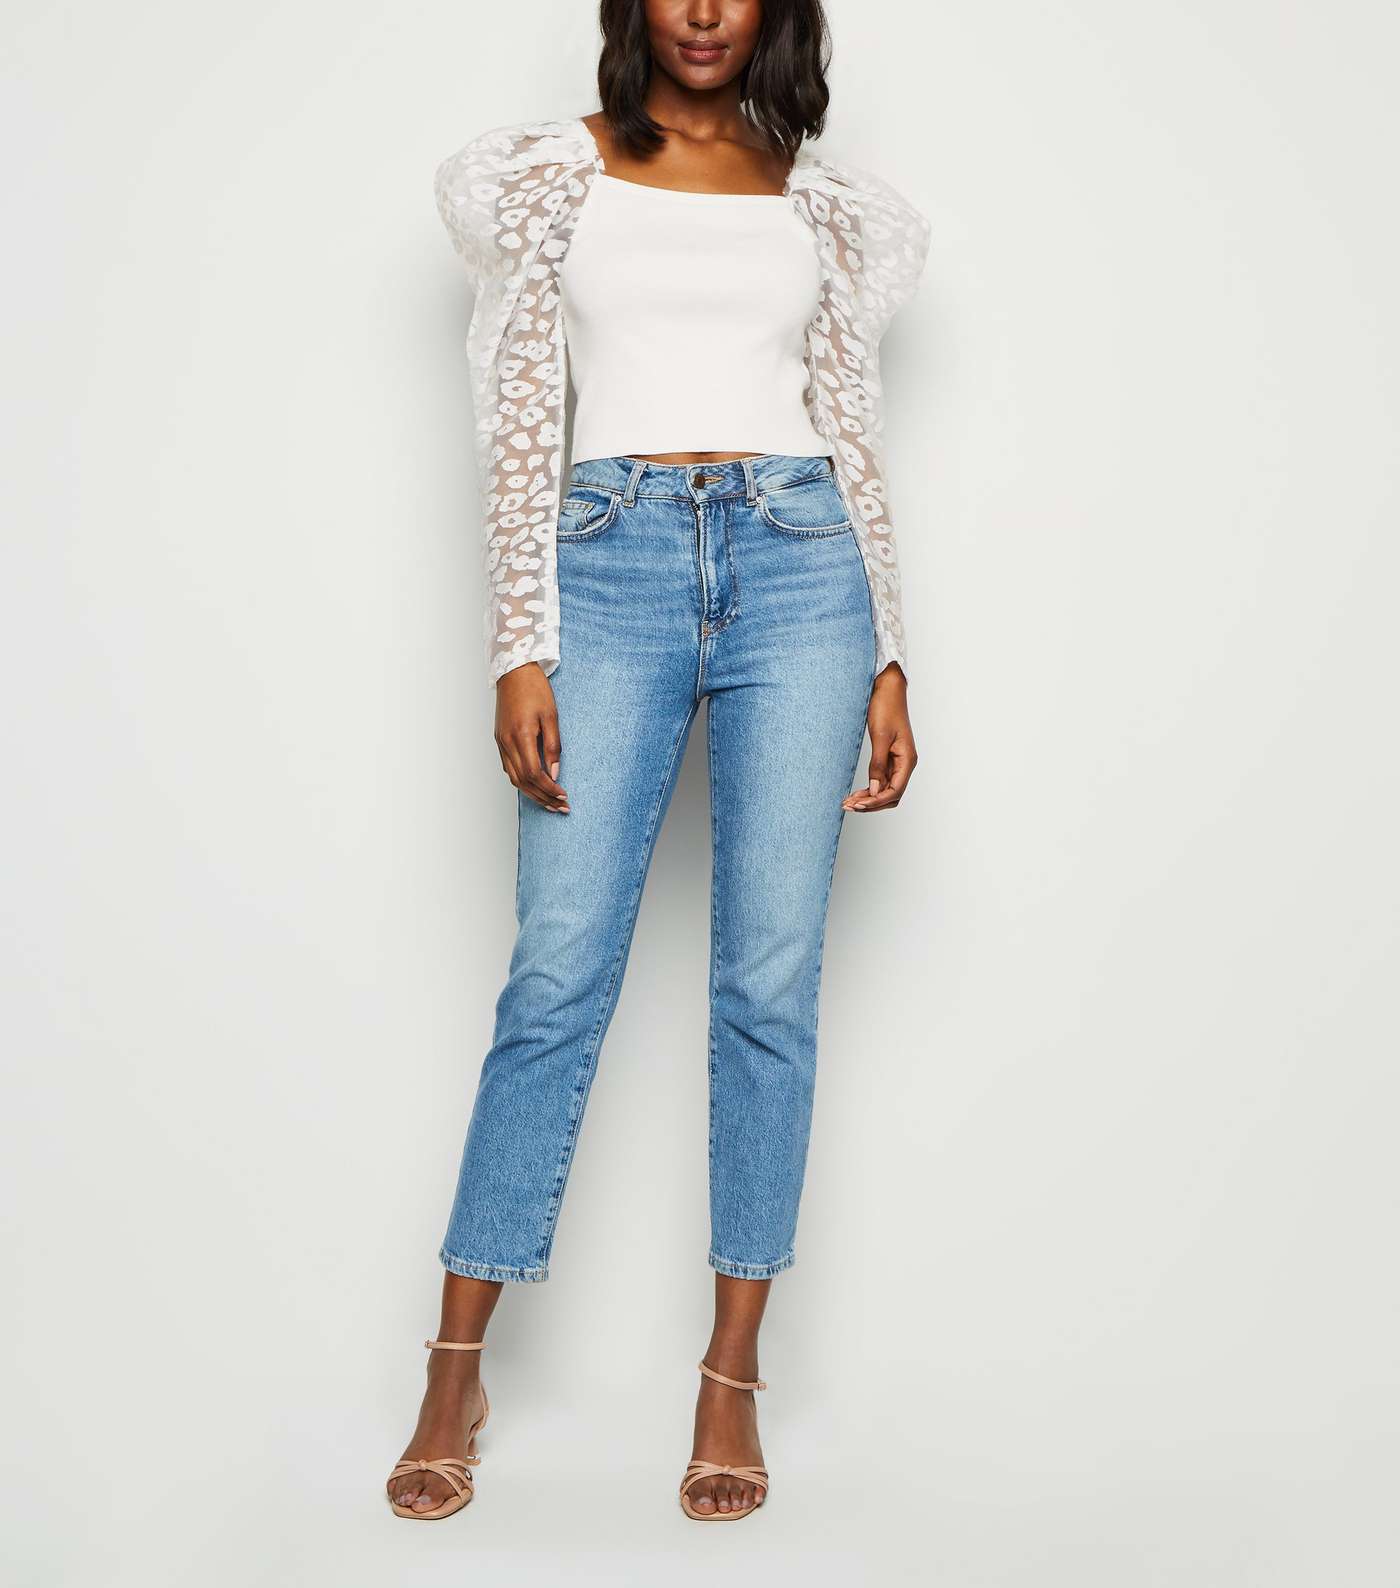 Cameo Rose Off White Leopard Puff Sleeve Top Image 2